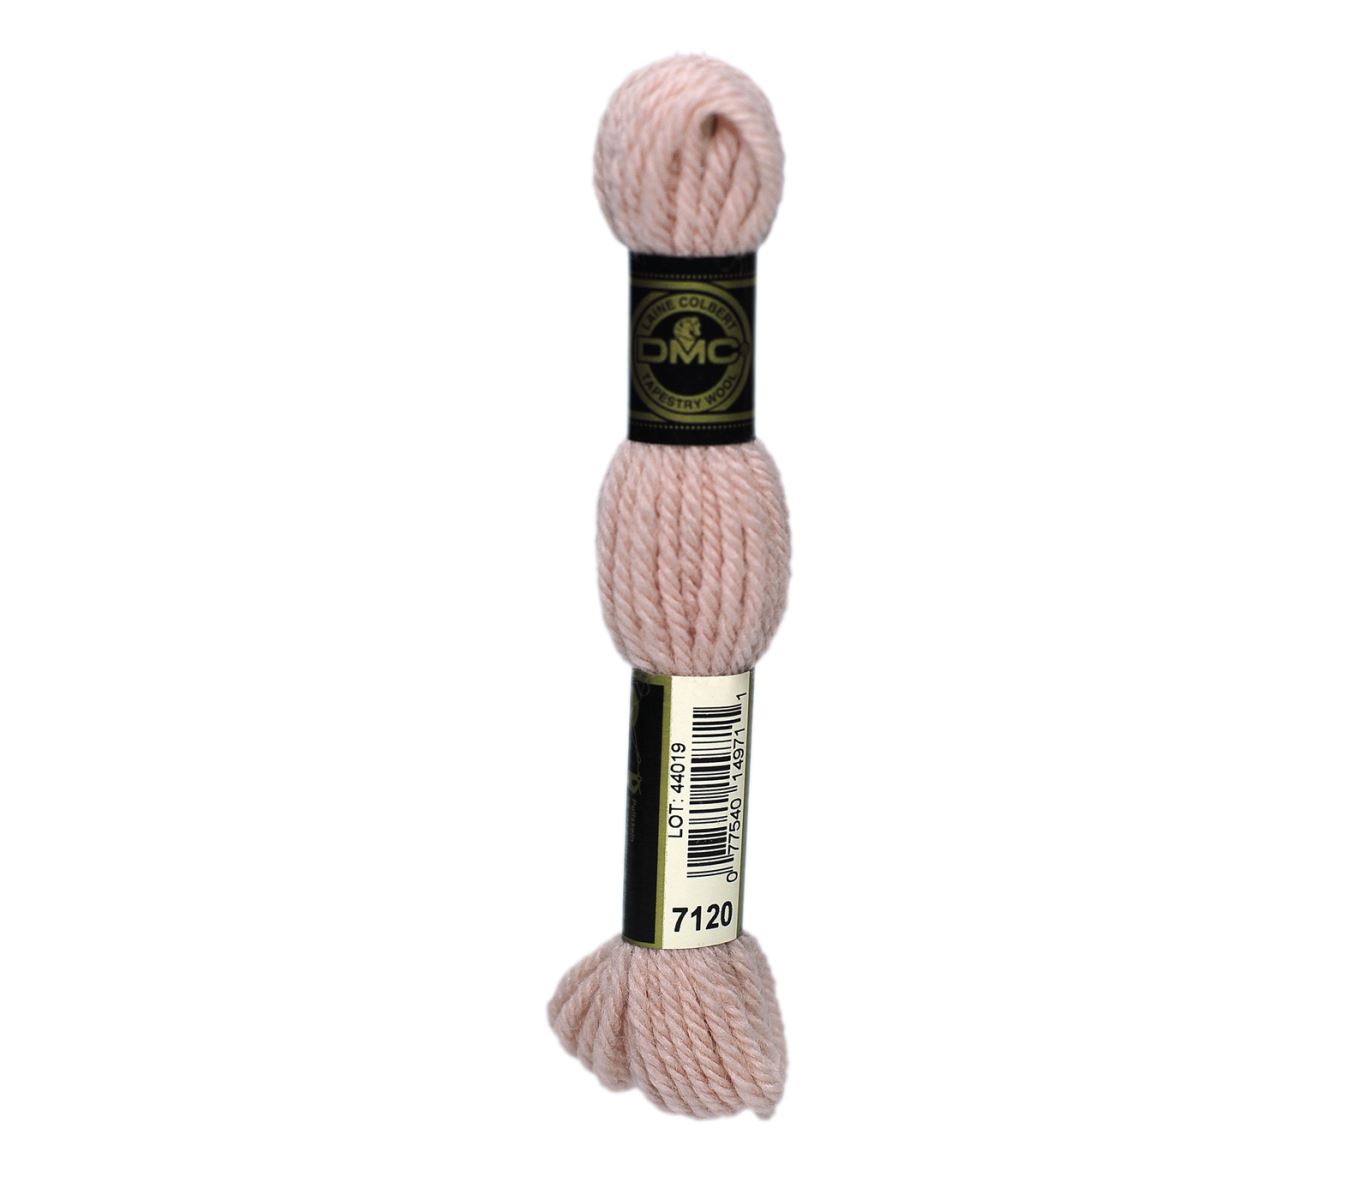 TAPESTRY WOOL 7120 by DMC in Thread Gift Sets - Embroidery Threads ...